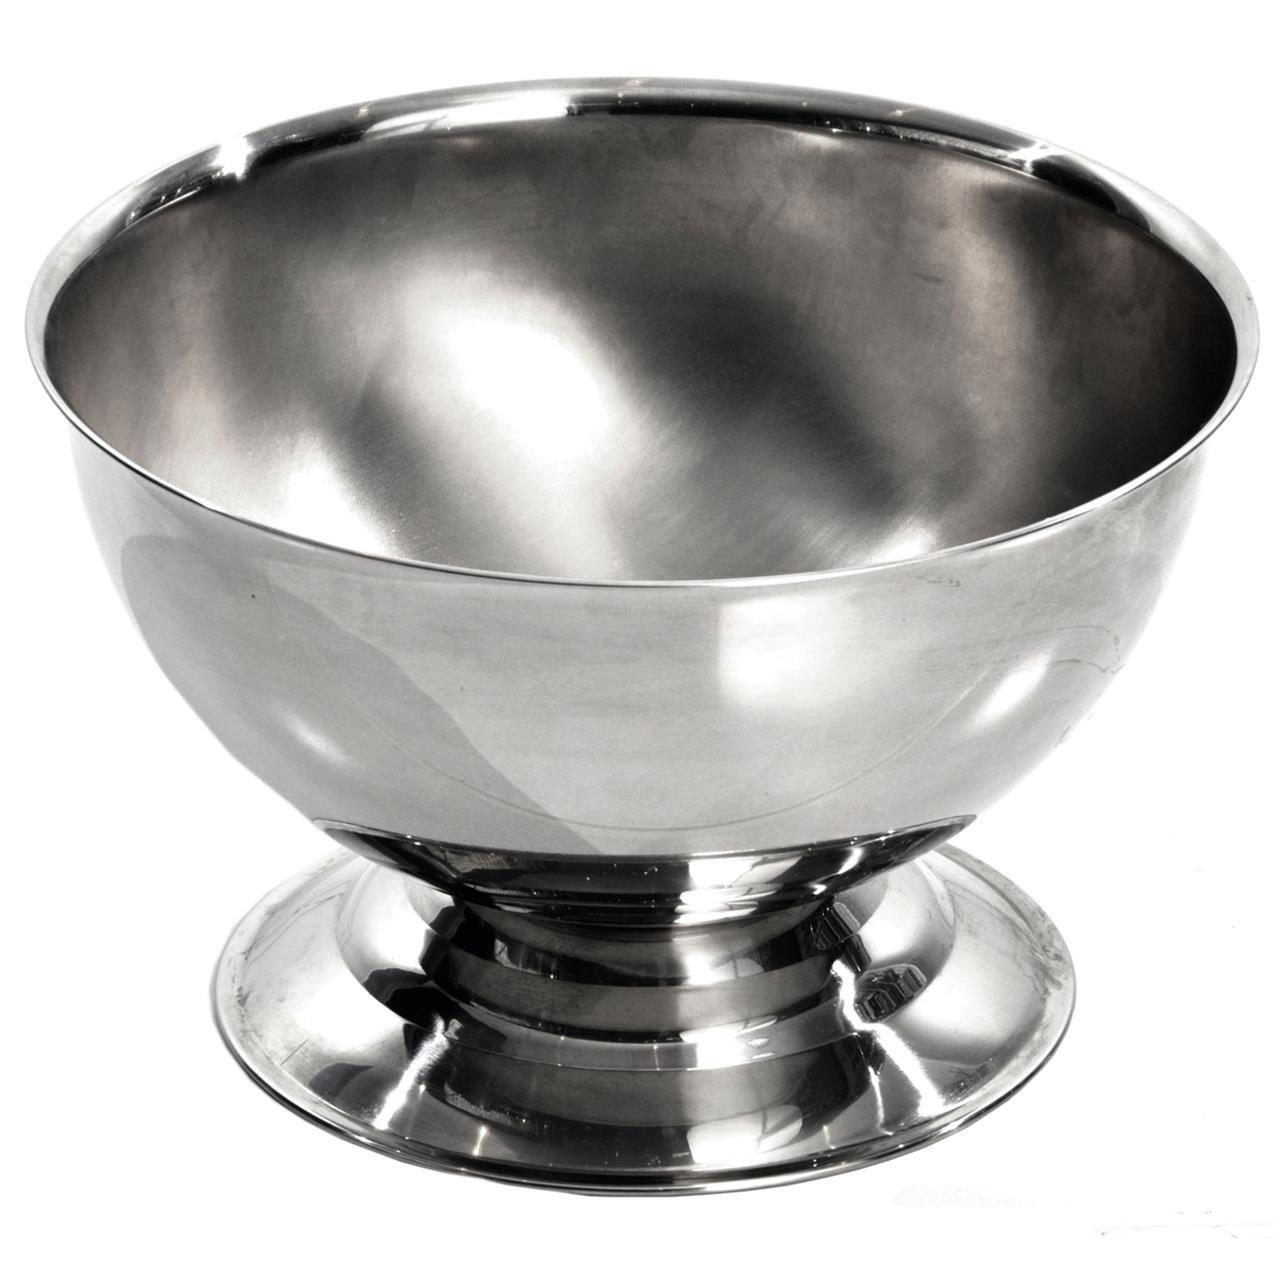 Details about   Punch Bowl 3.4 Gal FAST FREE SHIPPING Stainless Steel 